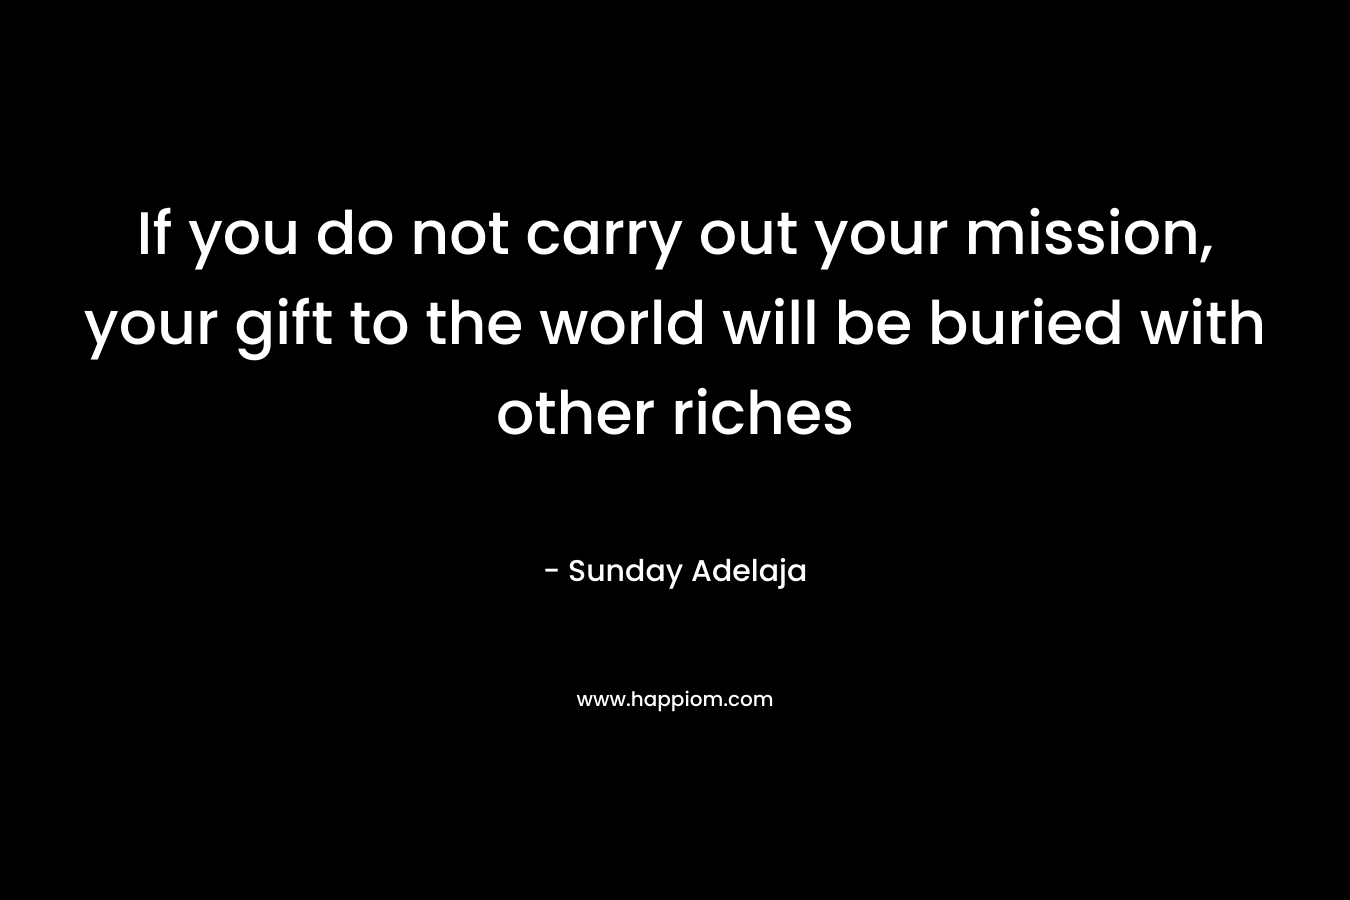 If you do not carry out your mission, your gift to the world will be buried with other riches